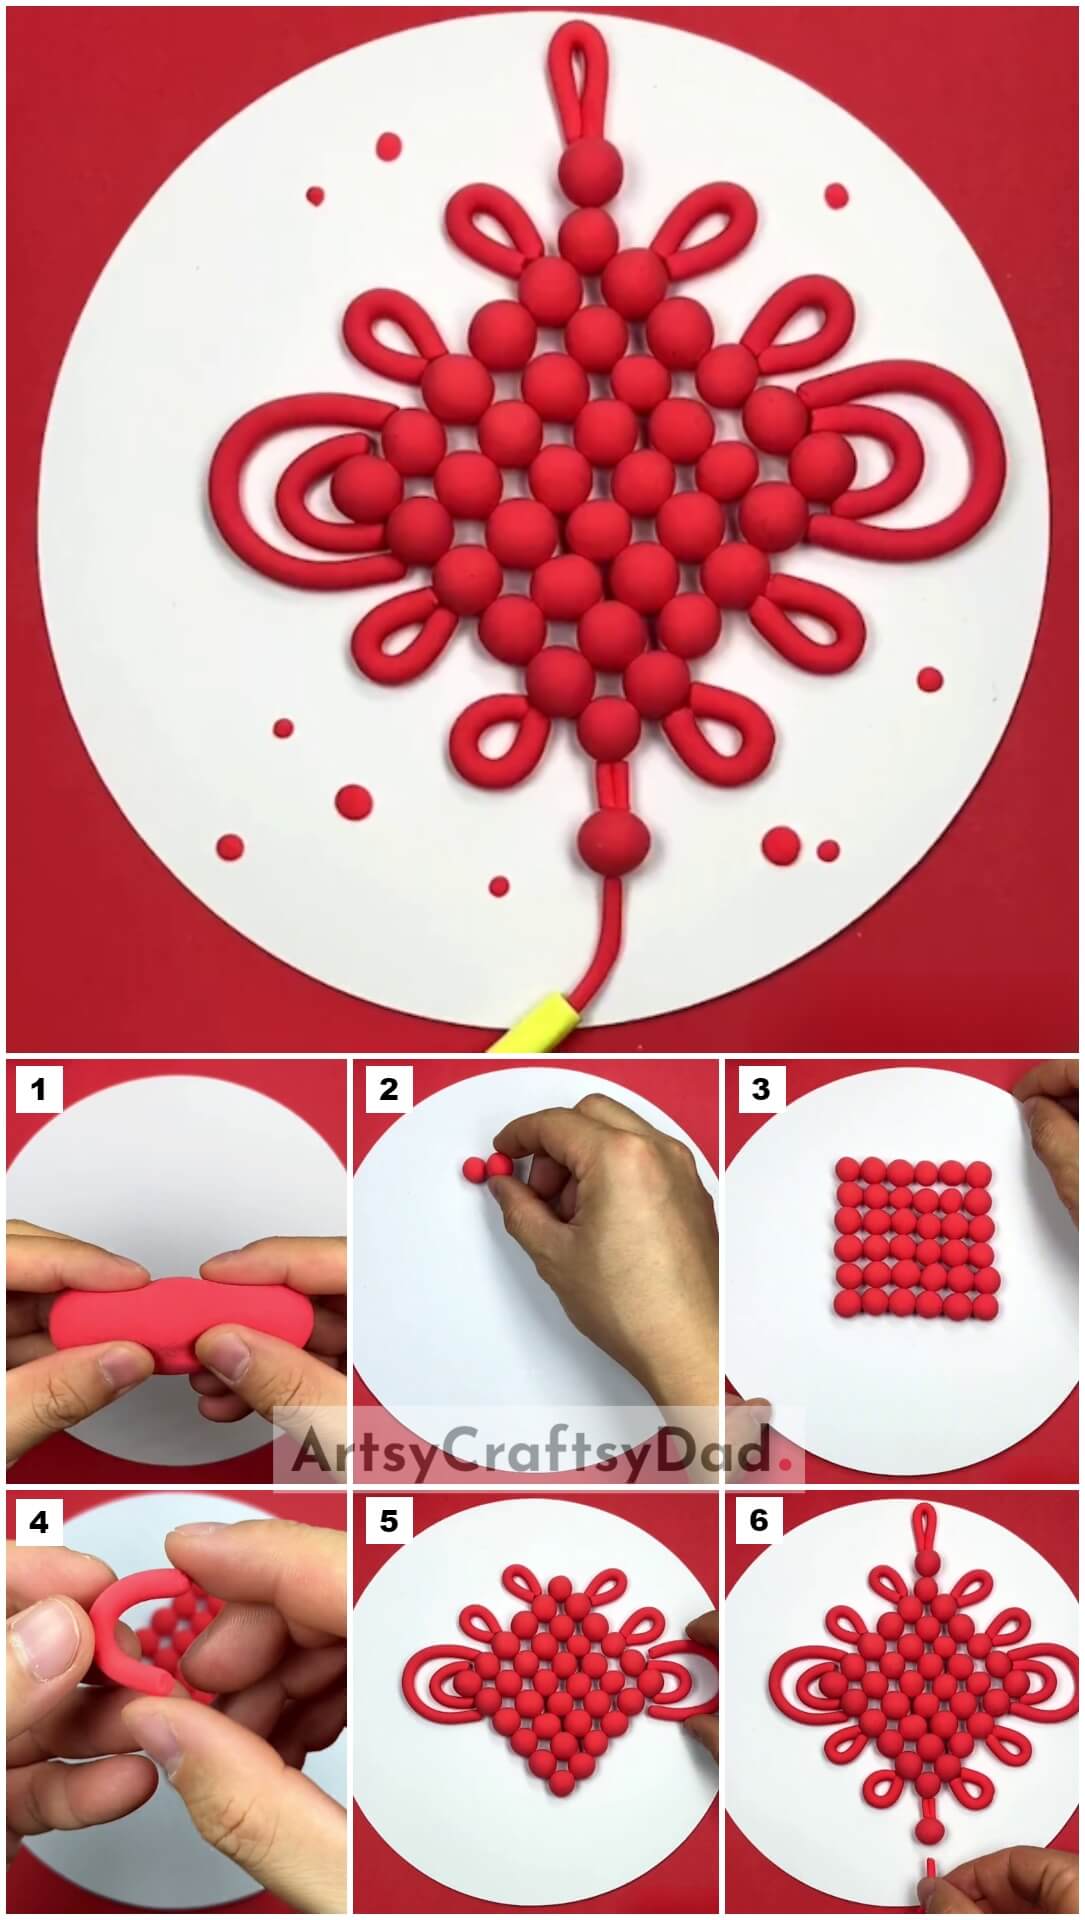 Clay Chinese Knot Craft Tutorial For Spring Festival